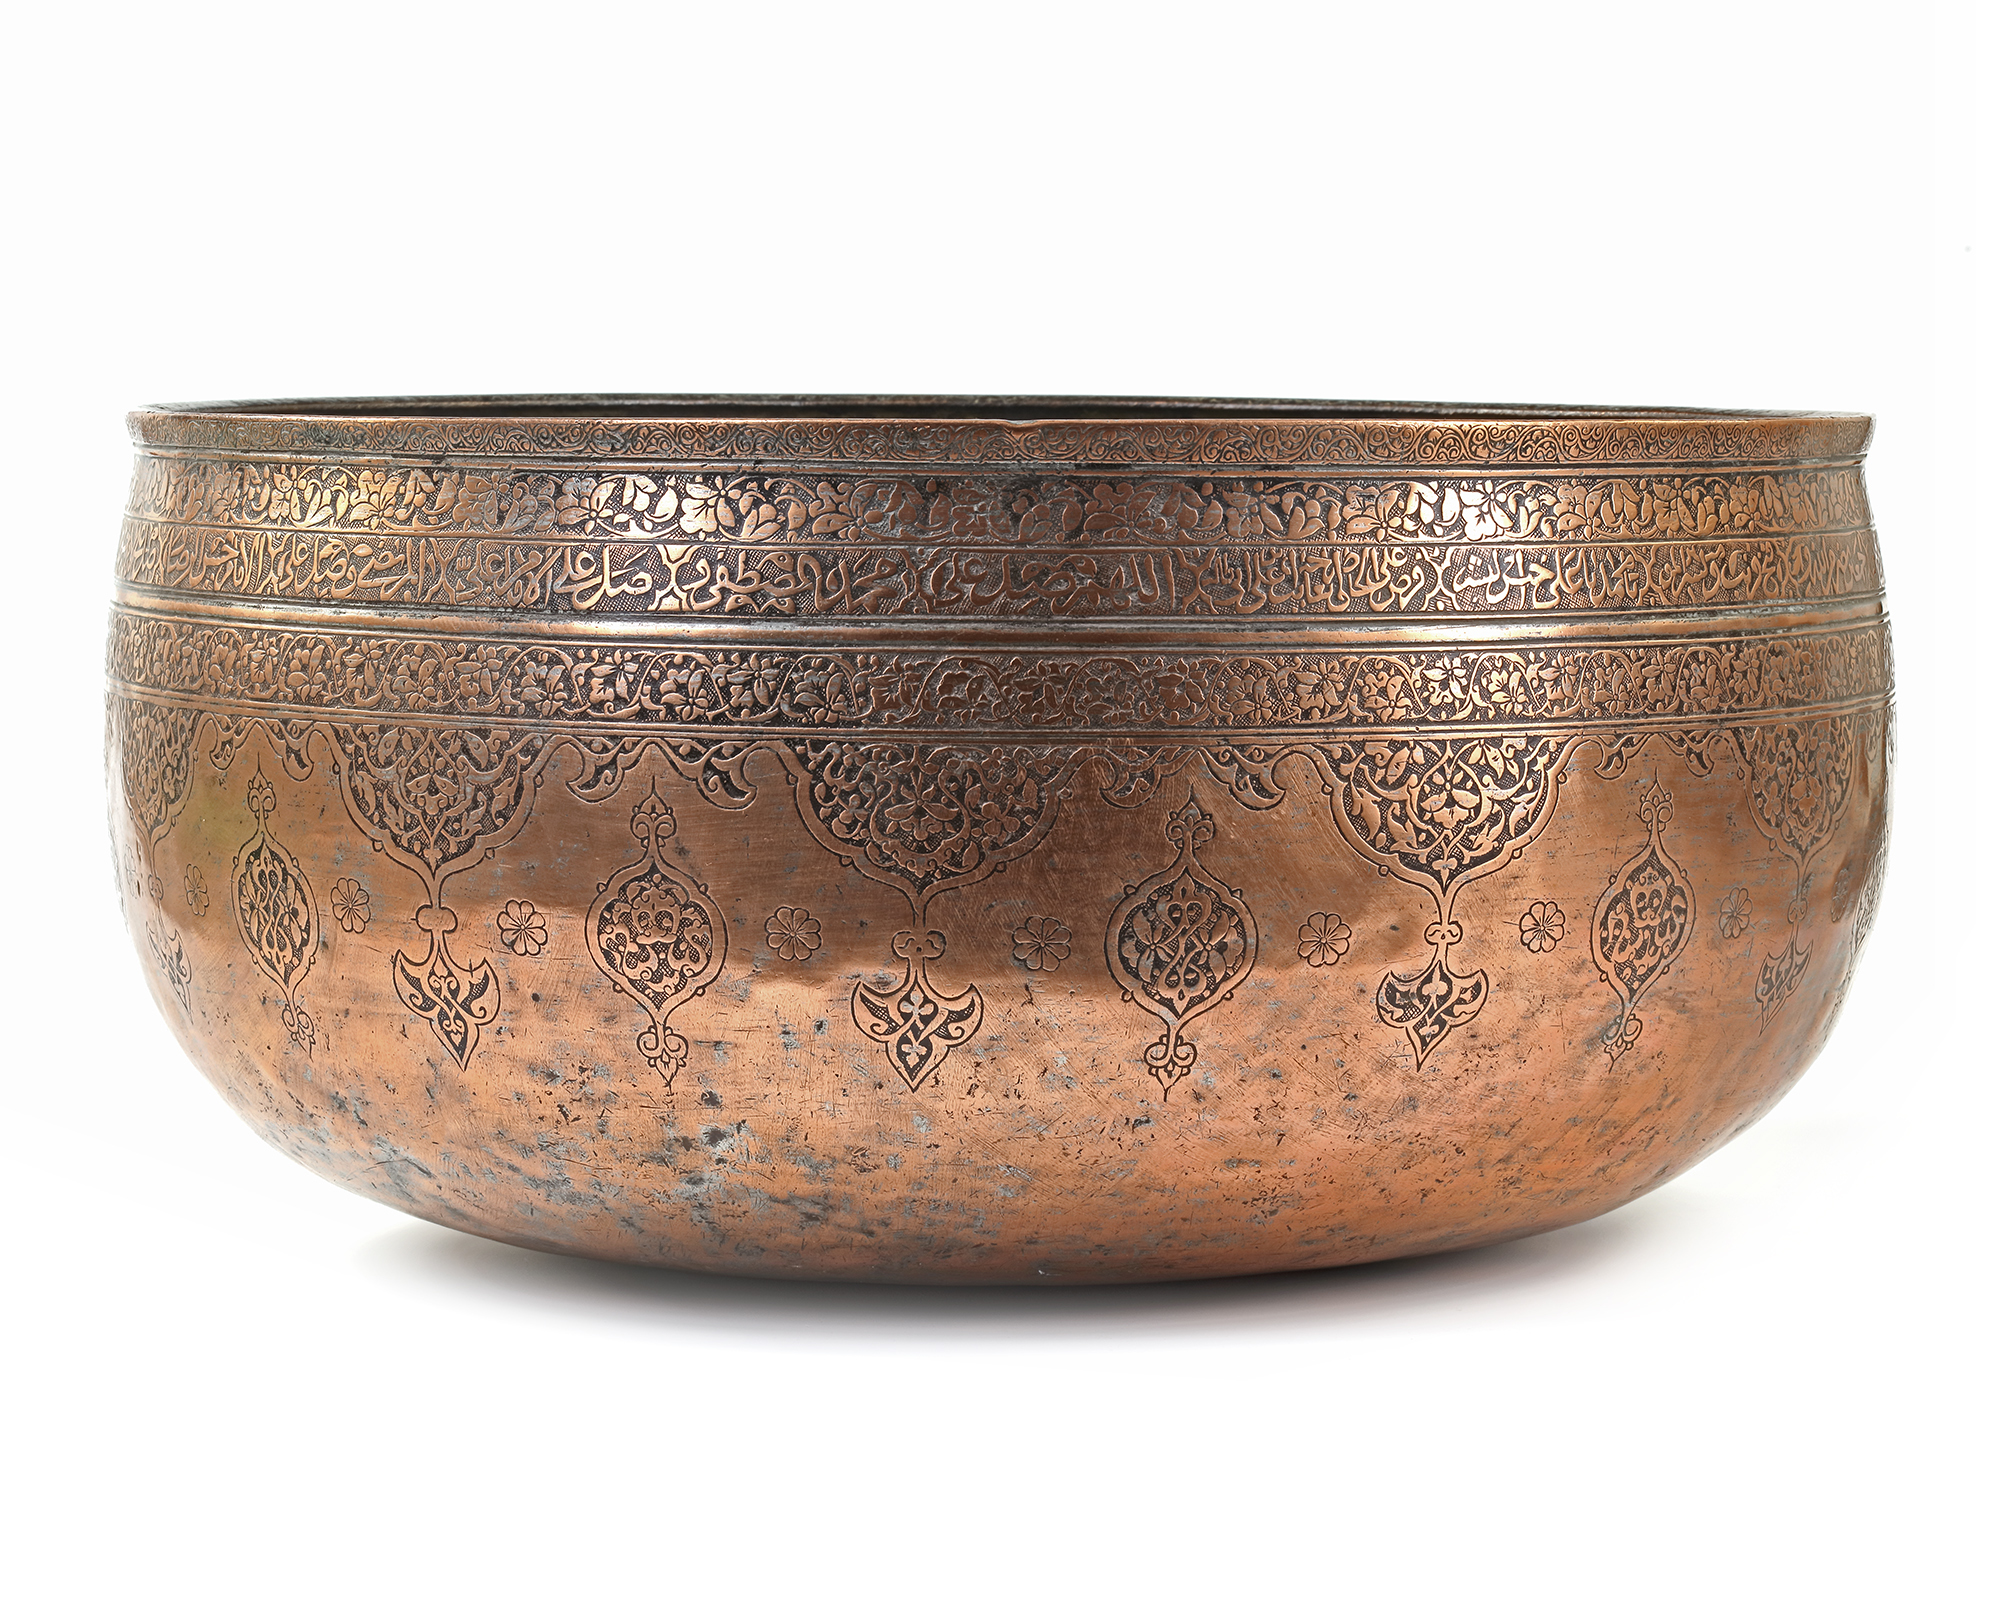 A MONUMENTAL LATE TIMURID ENGRAVED COPPER BOWL, CENTRAL ASIA, LATE 15TH-EARLY 16TH CENTURY - Image 2 of 12